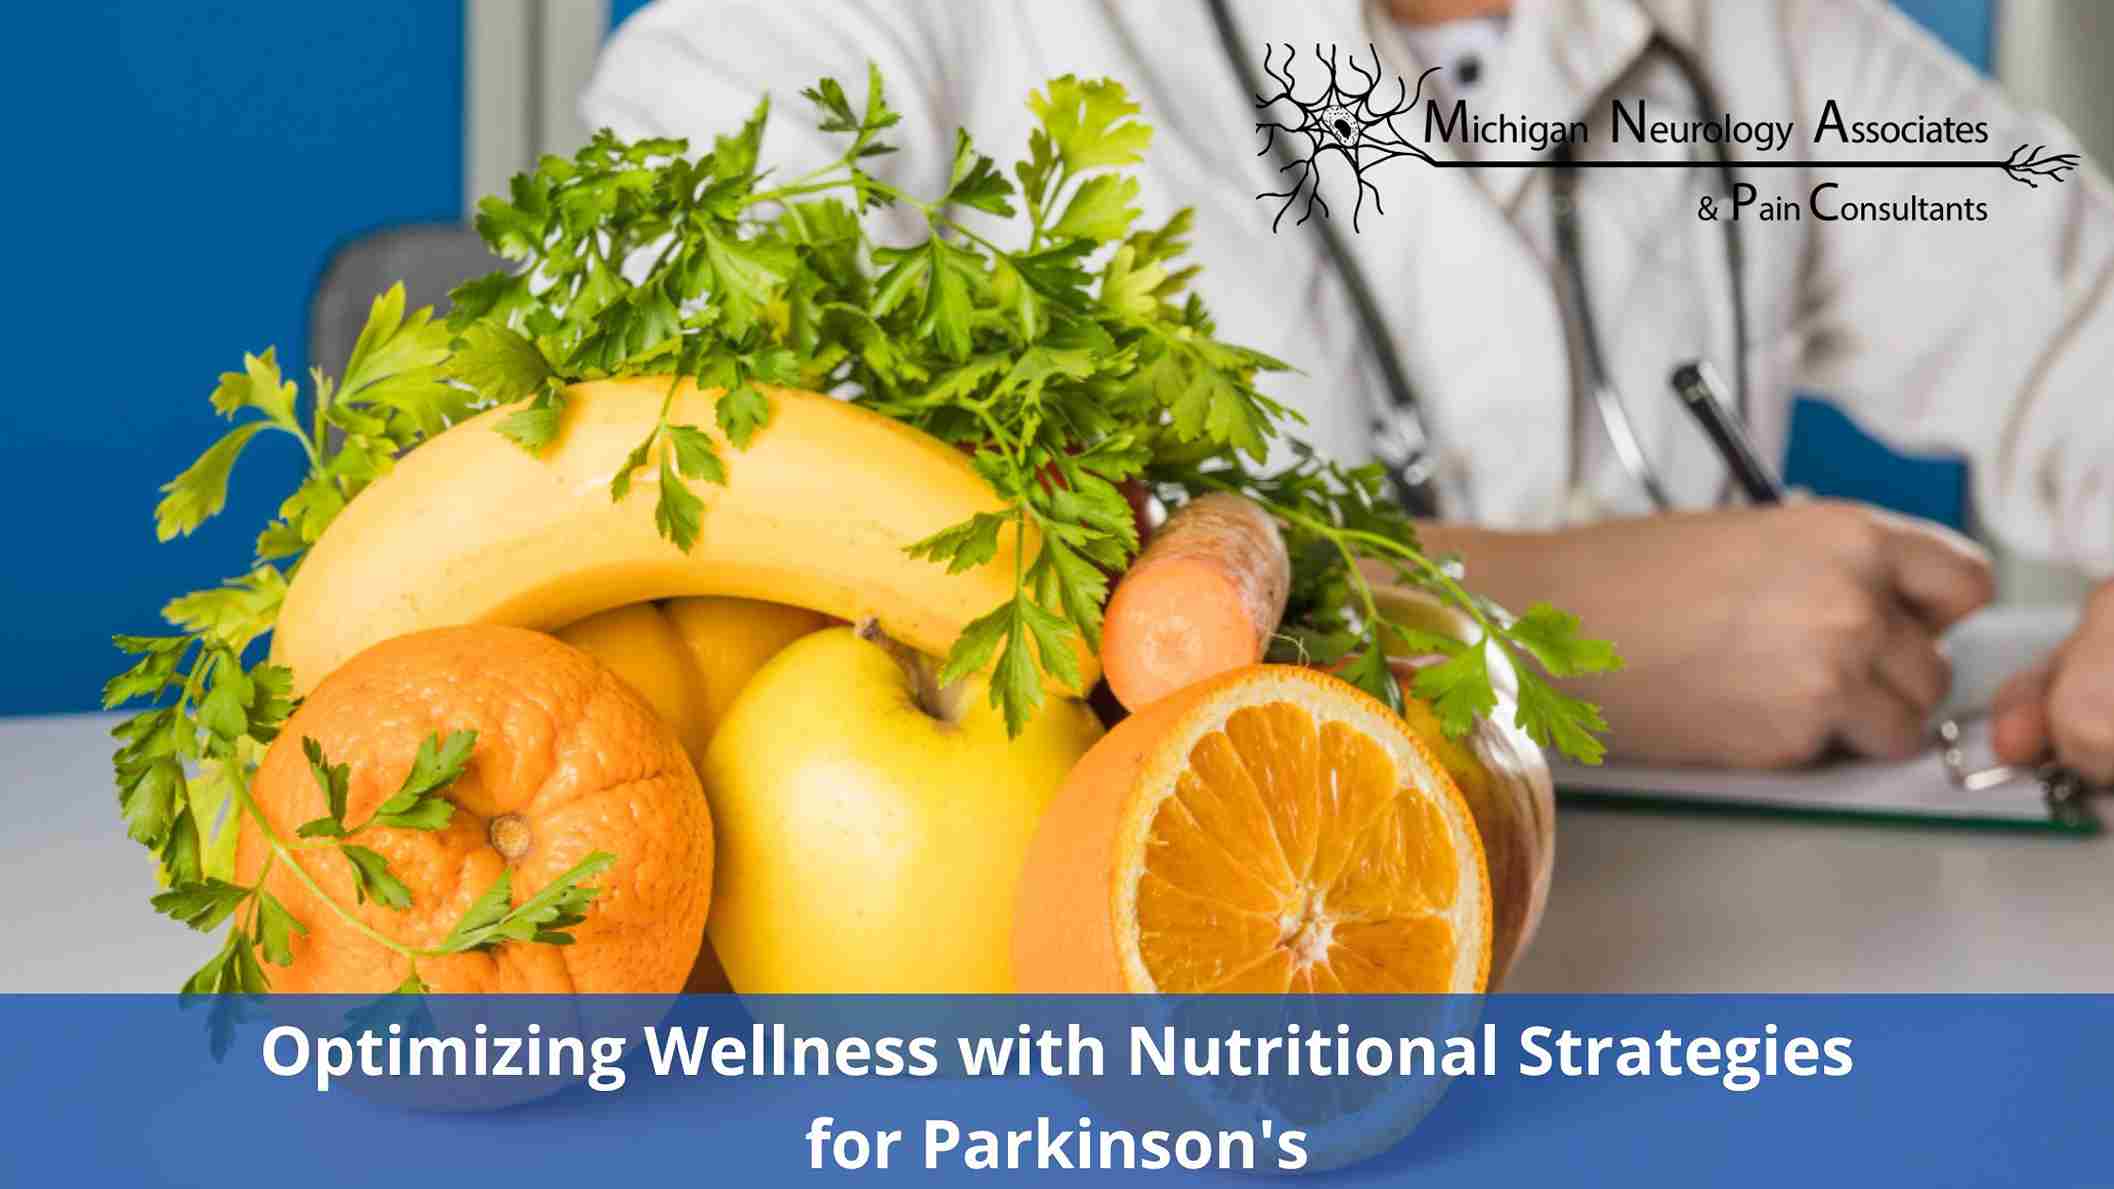 Optimizing Wellness with Nutritional Strategies for Parkinson's